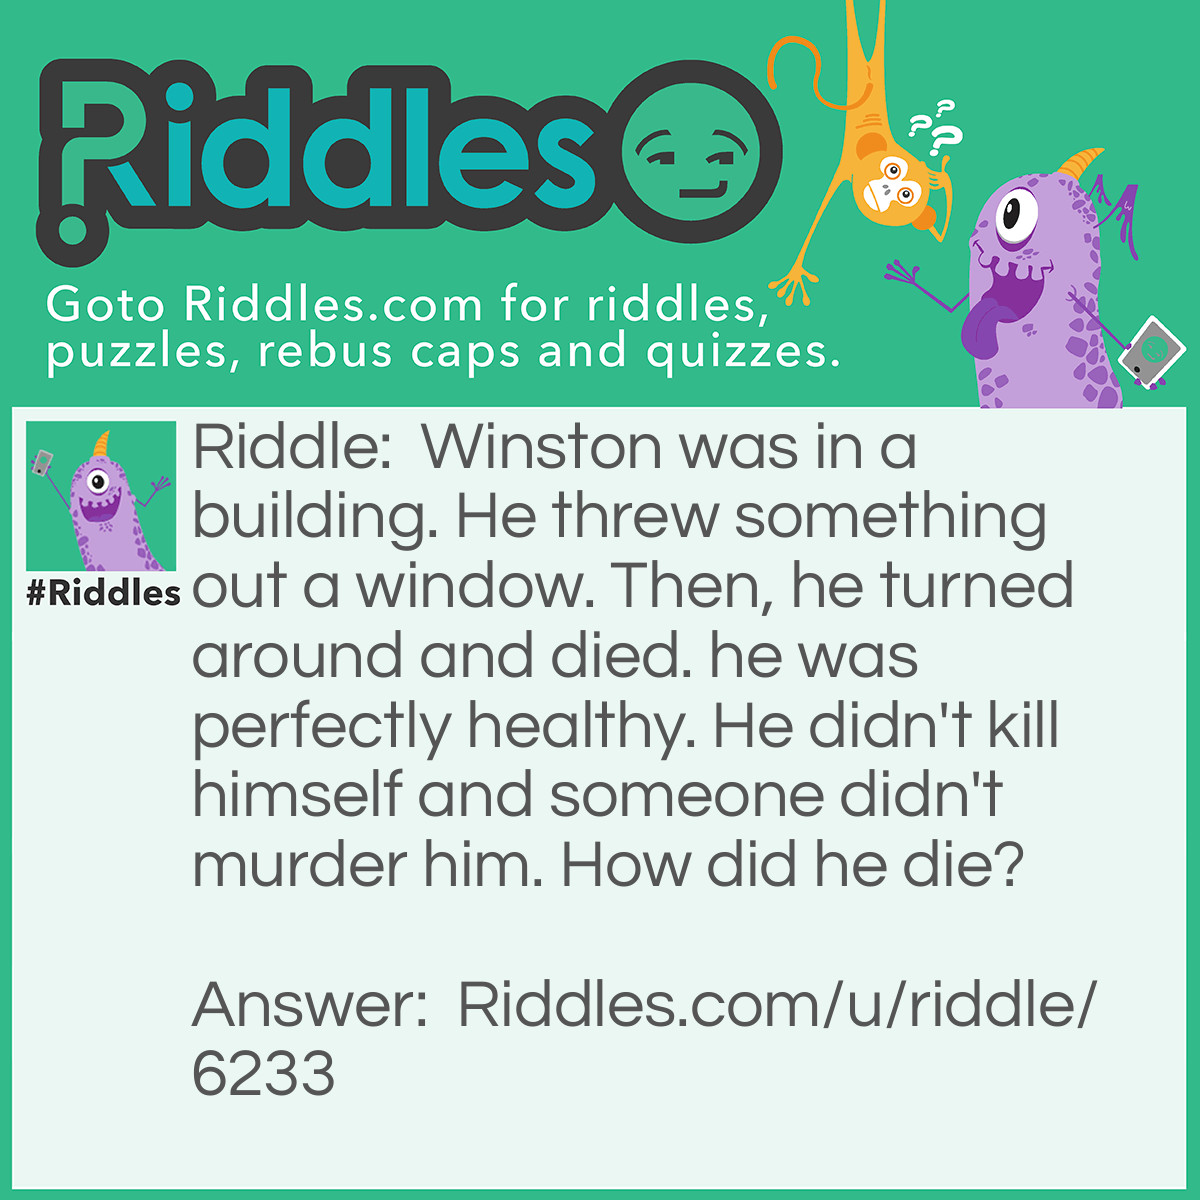 Riddle: Winston was in a building. He threw something out a window. Then, he turned around and died. he was perfectly healthy. He didn't kill himself and someone didn't murder him. How did he die? Answer: He threw a sharp boomerang out the window. Because of gravity, the boomerang goes back to Winston and hitted him in the head.